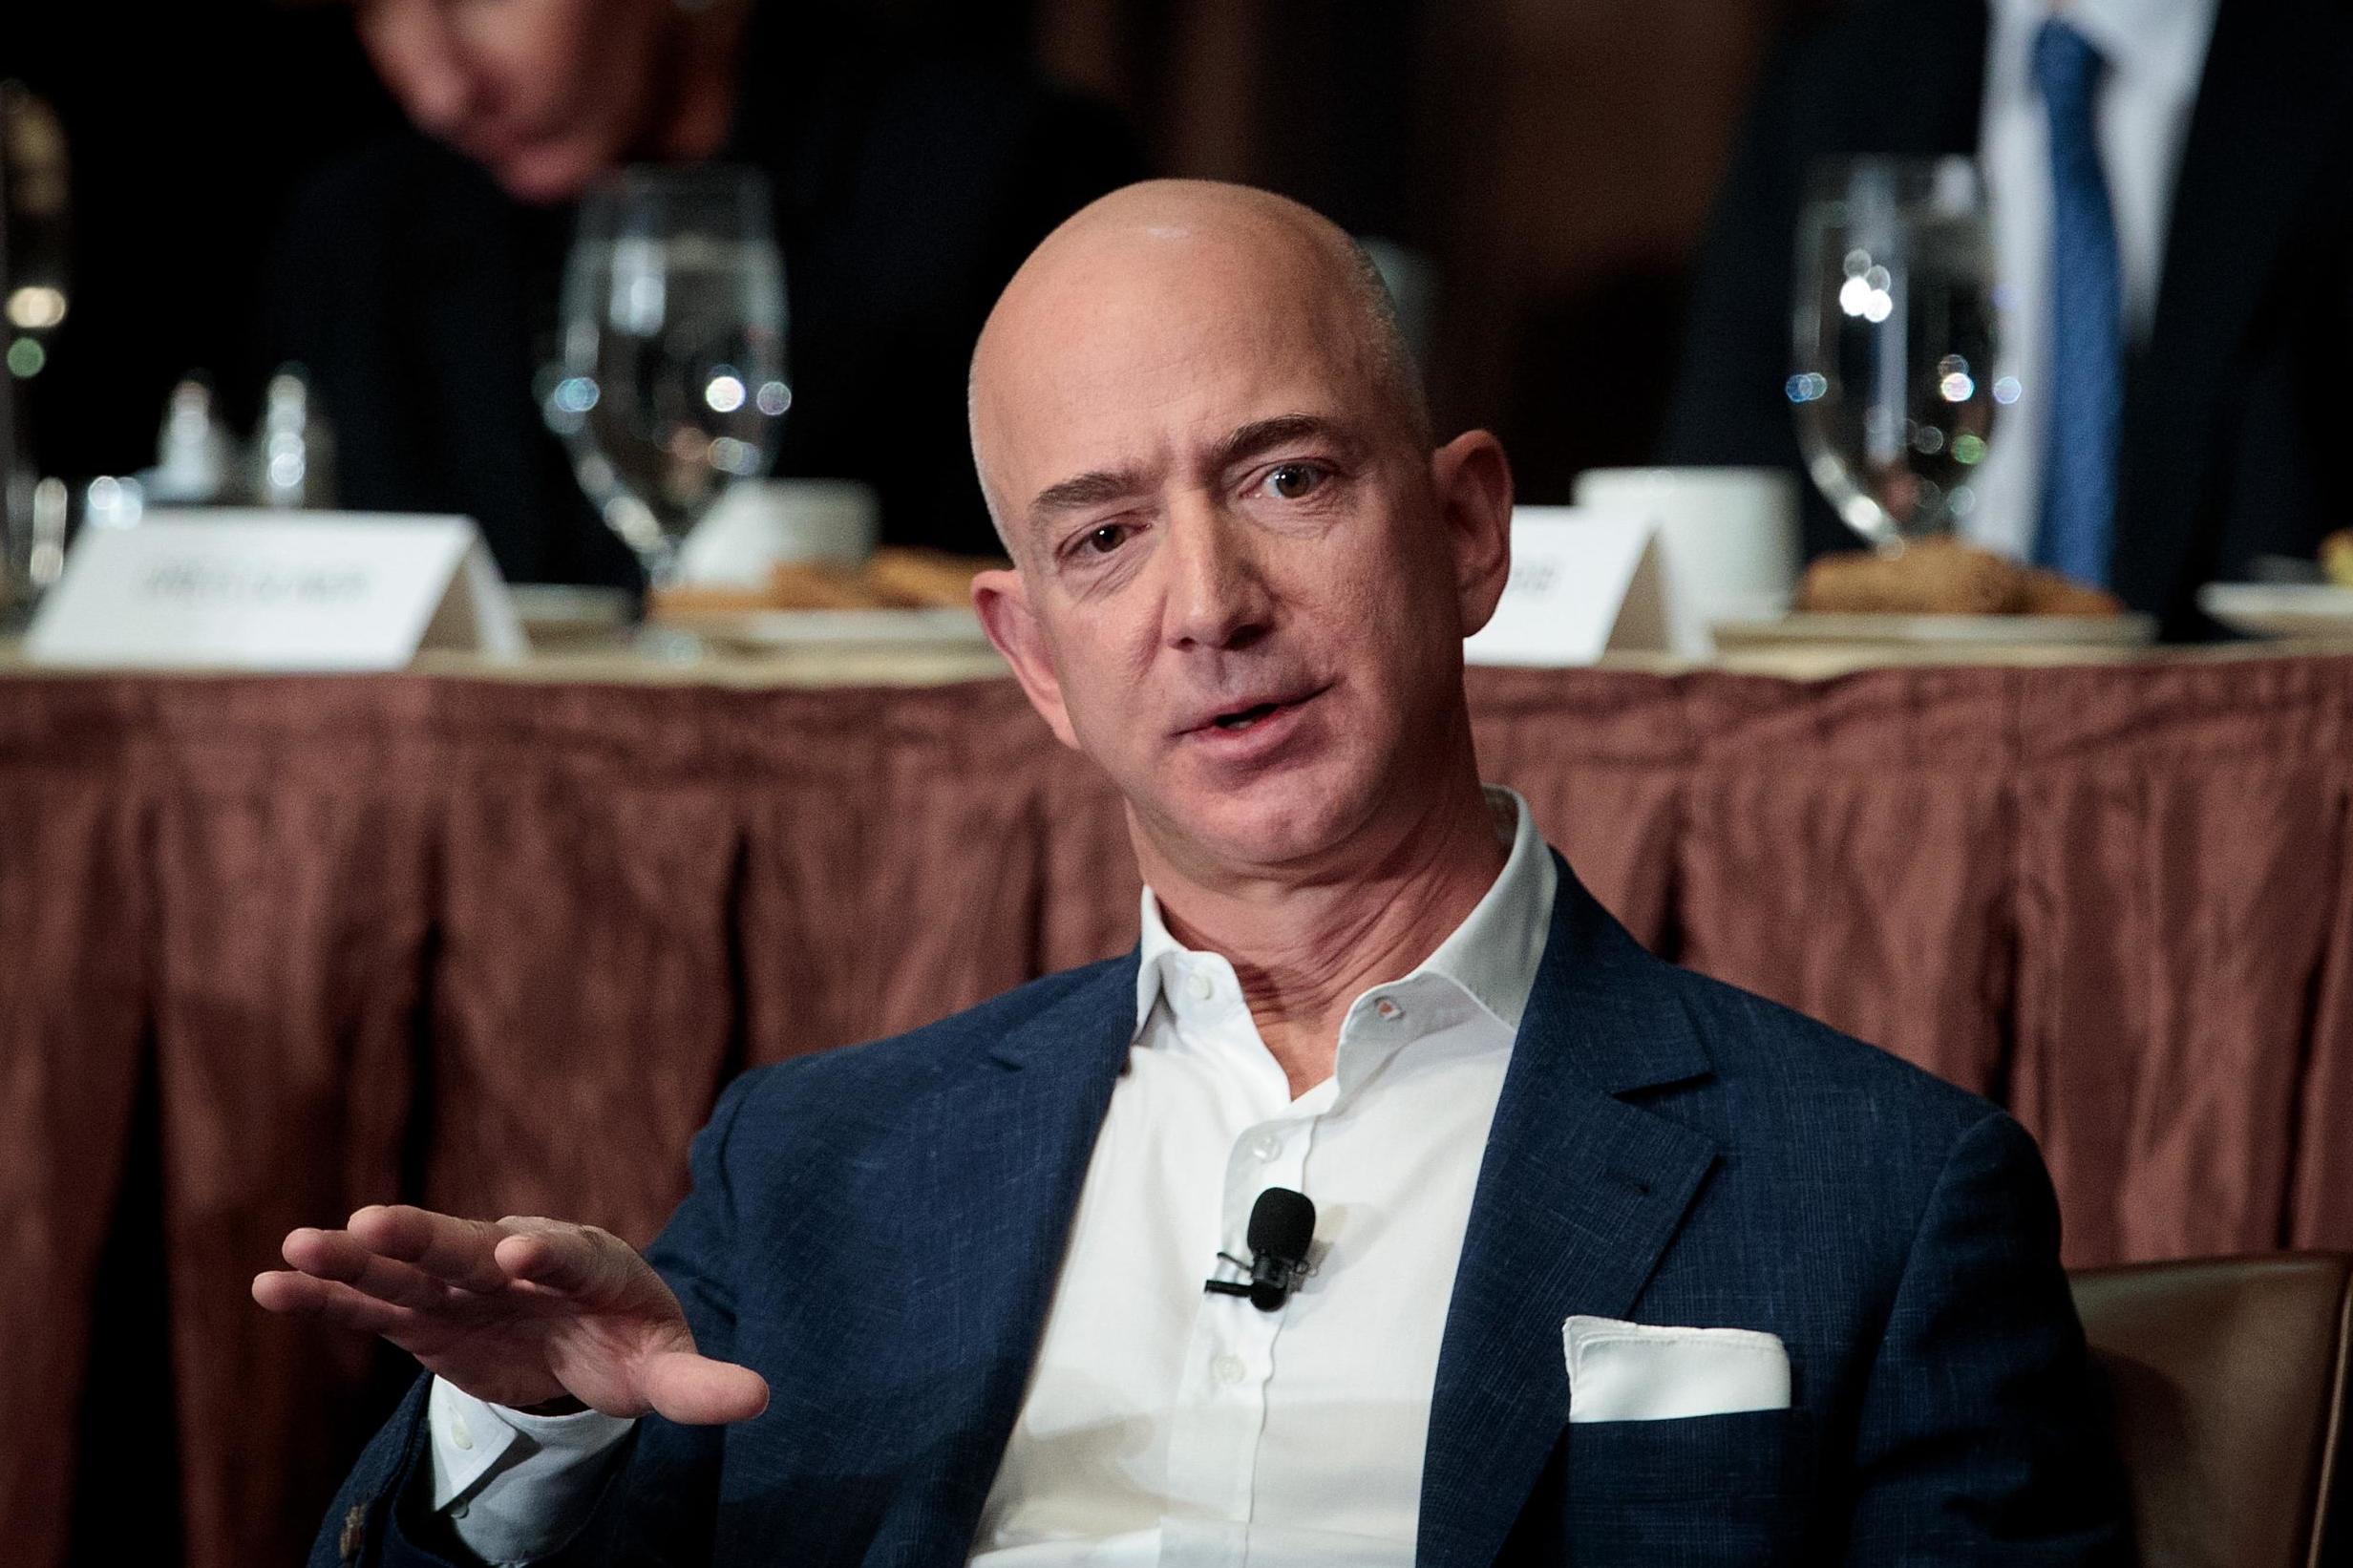 Mr Bezos started Amazon from his basement in Seattle before it later became one of the world's biggest online retailers